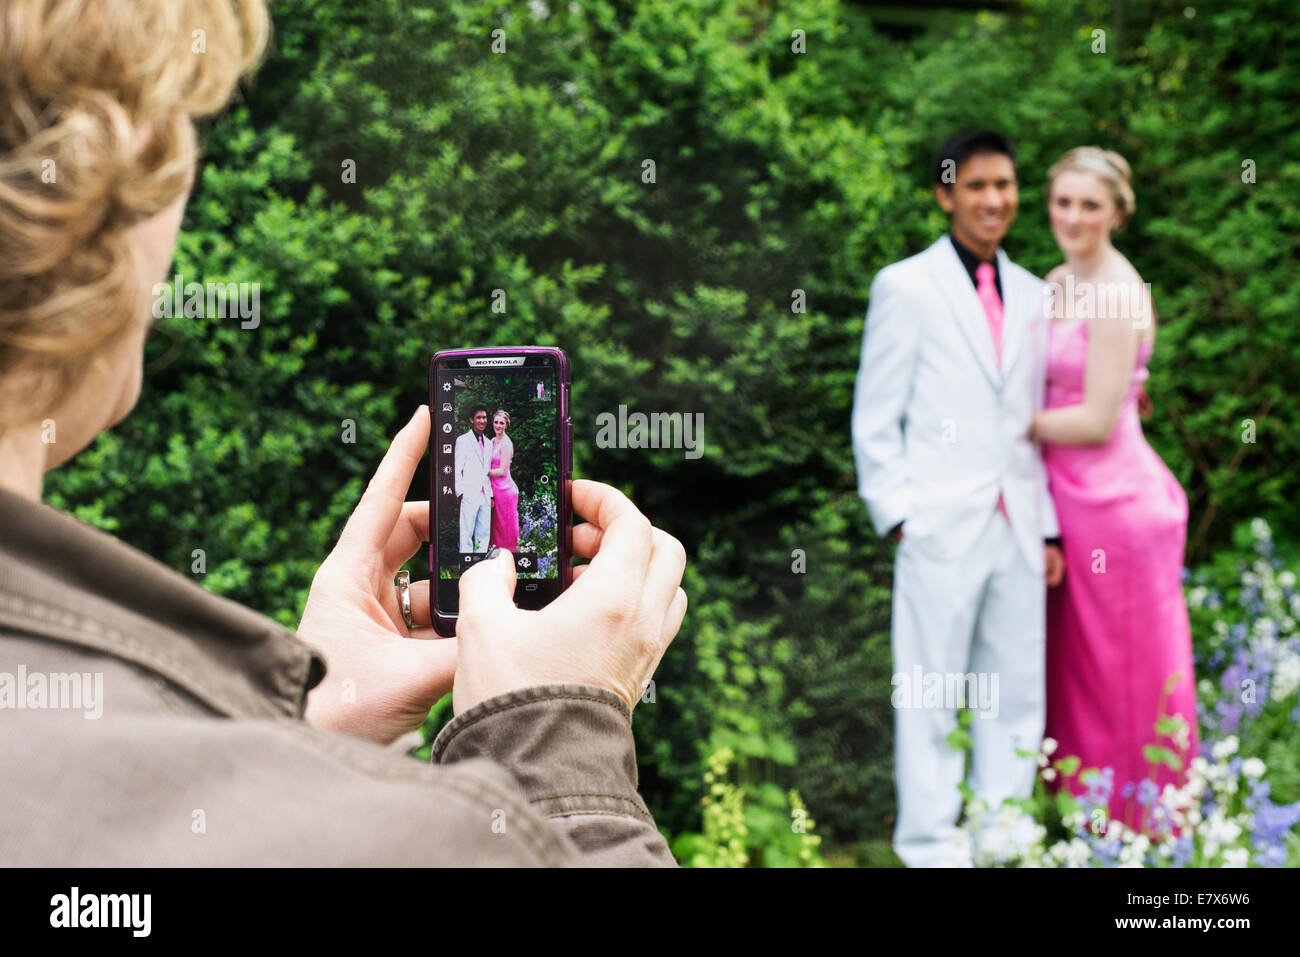 A mother taking a photograph of her daughter and prom date. Stock Photo